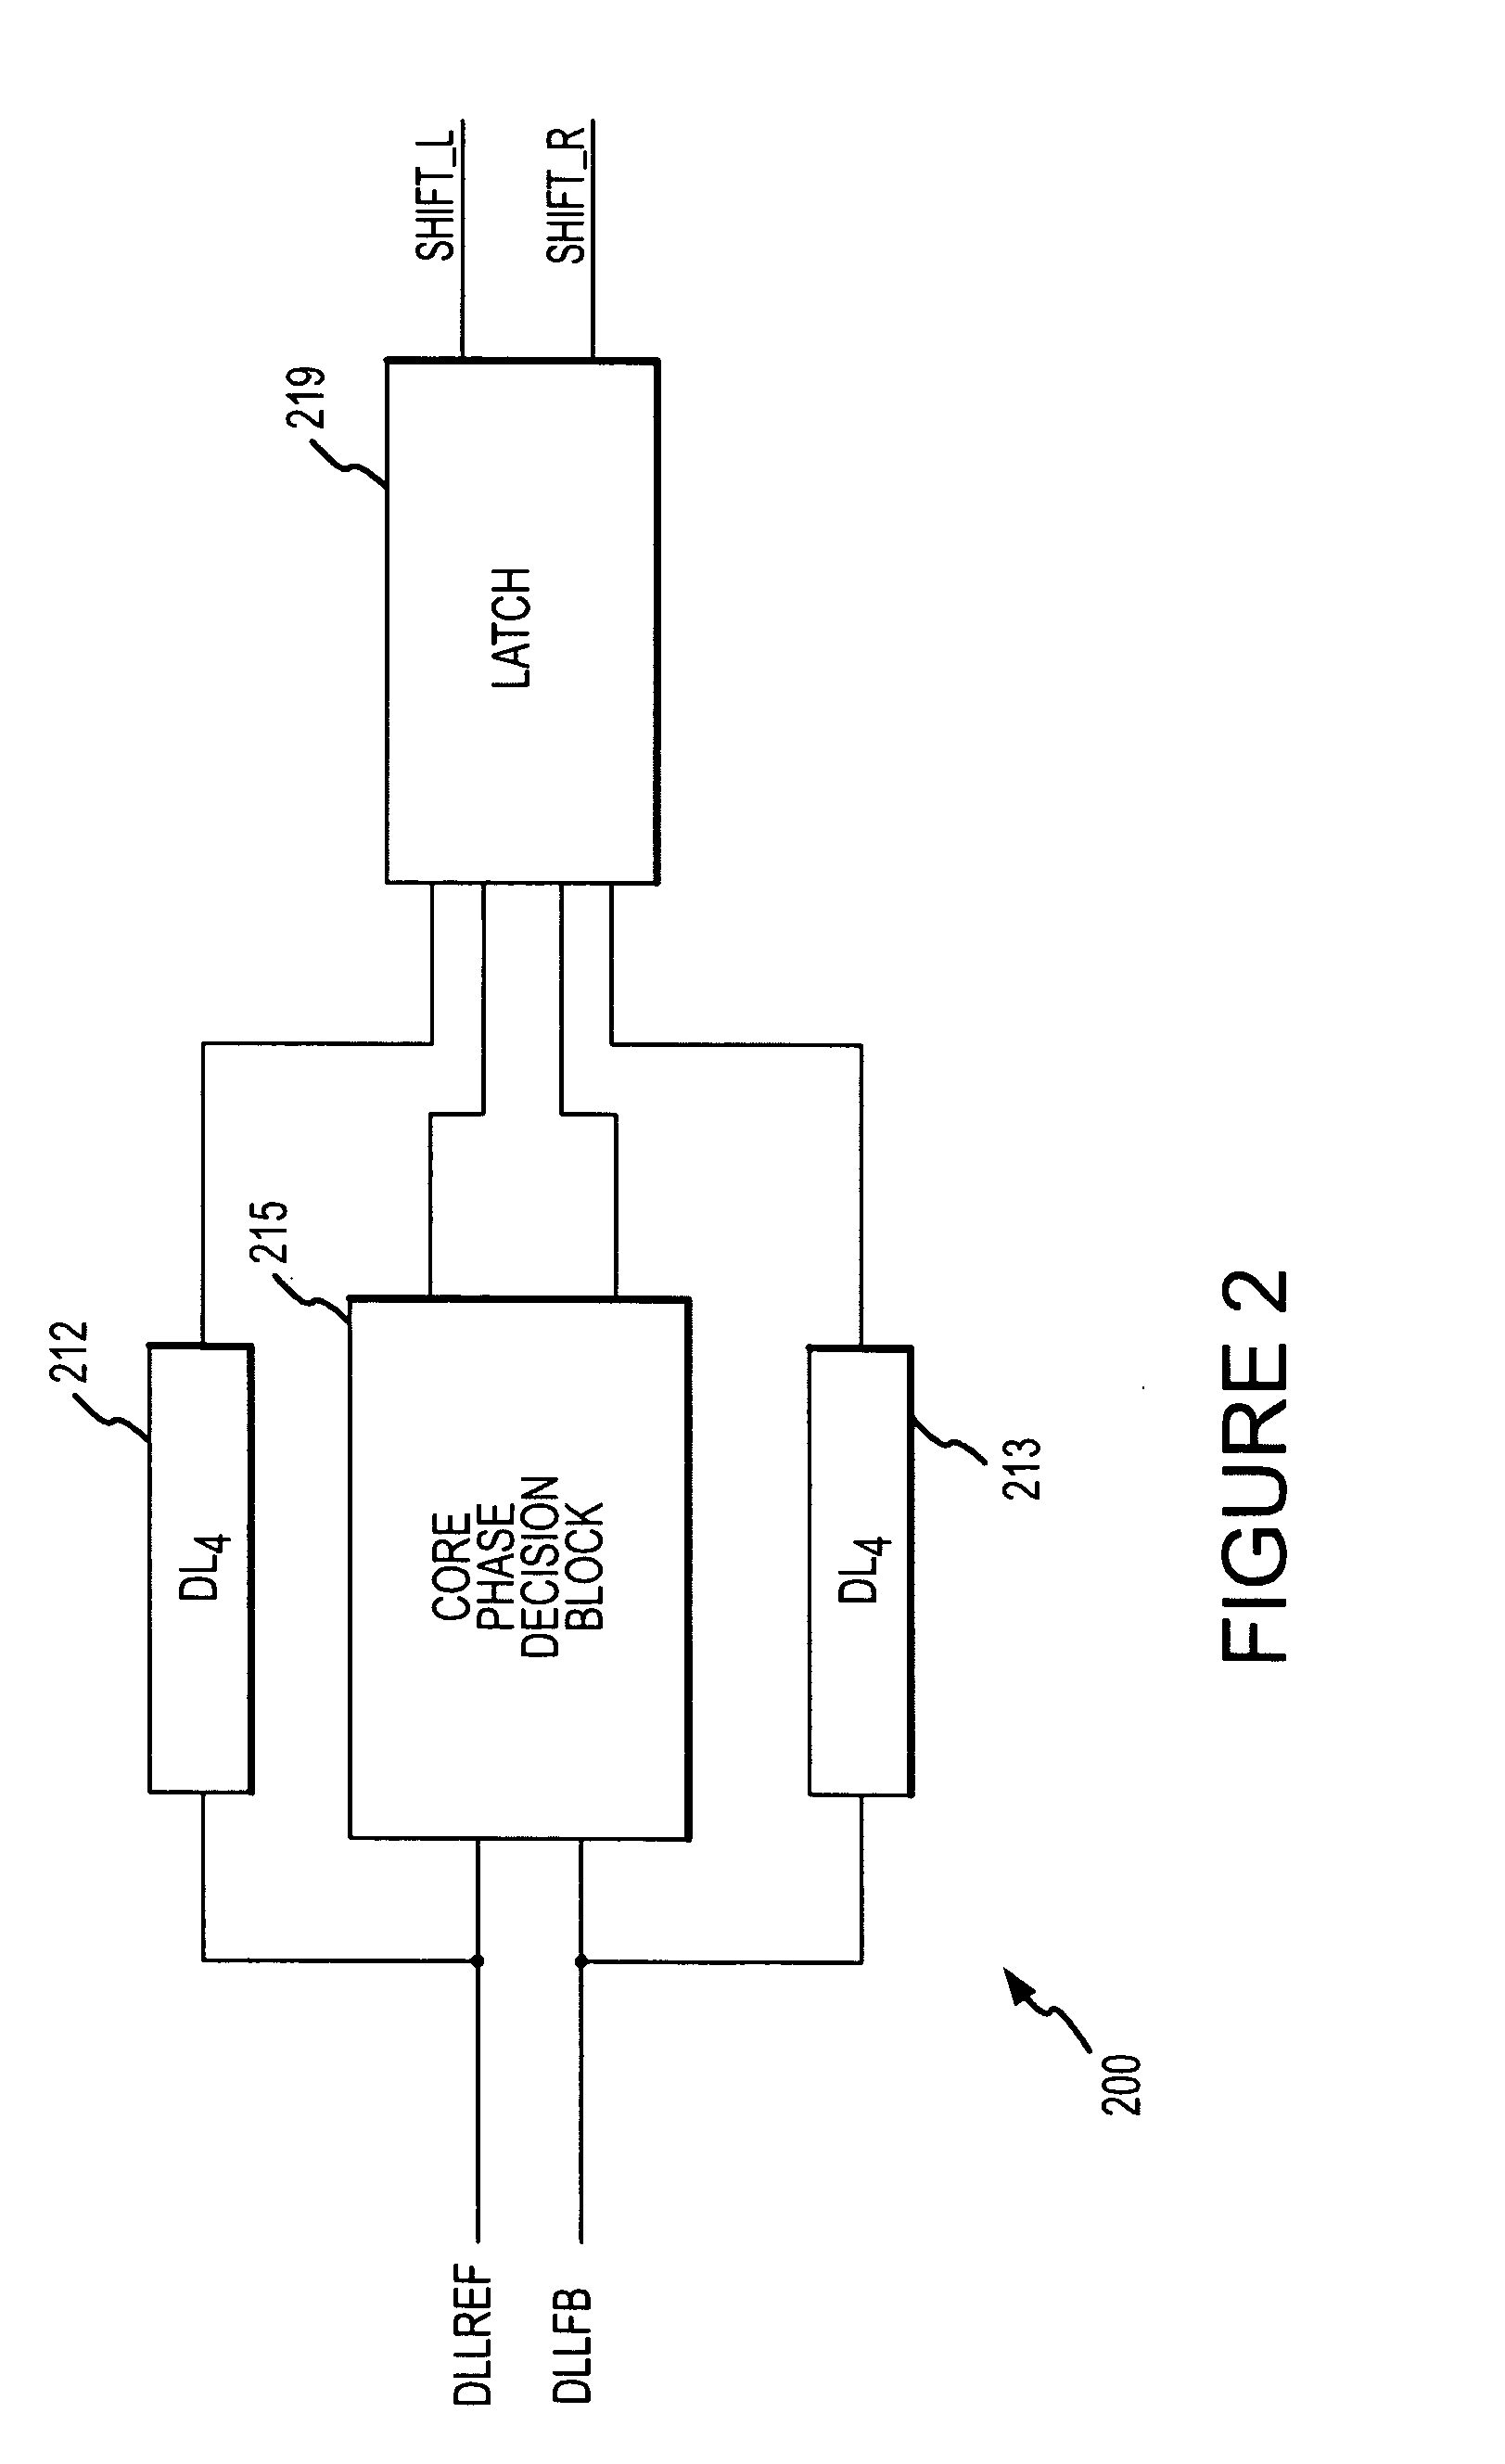 Fast response time, low power phase detector circuits, devices and systems incorporating the same, and associated methods